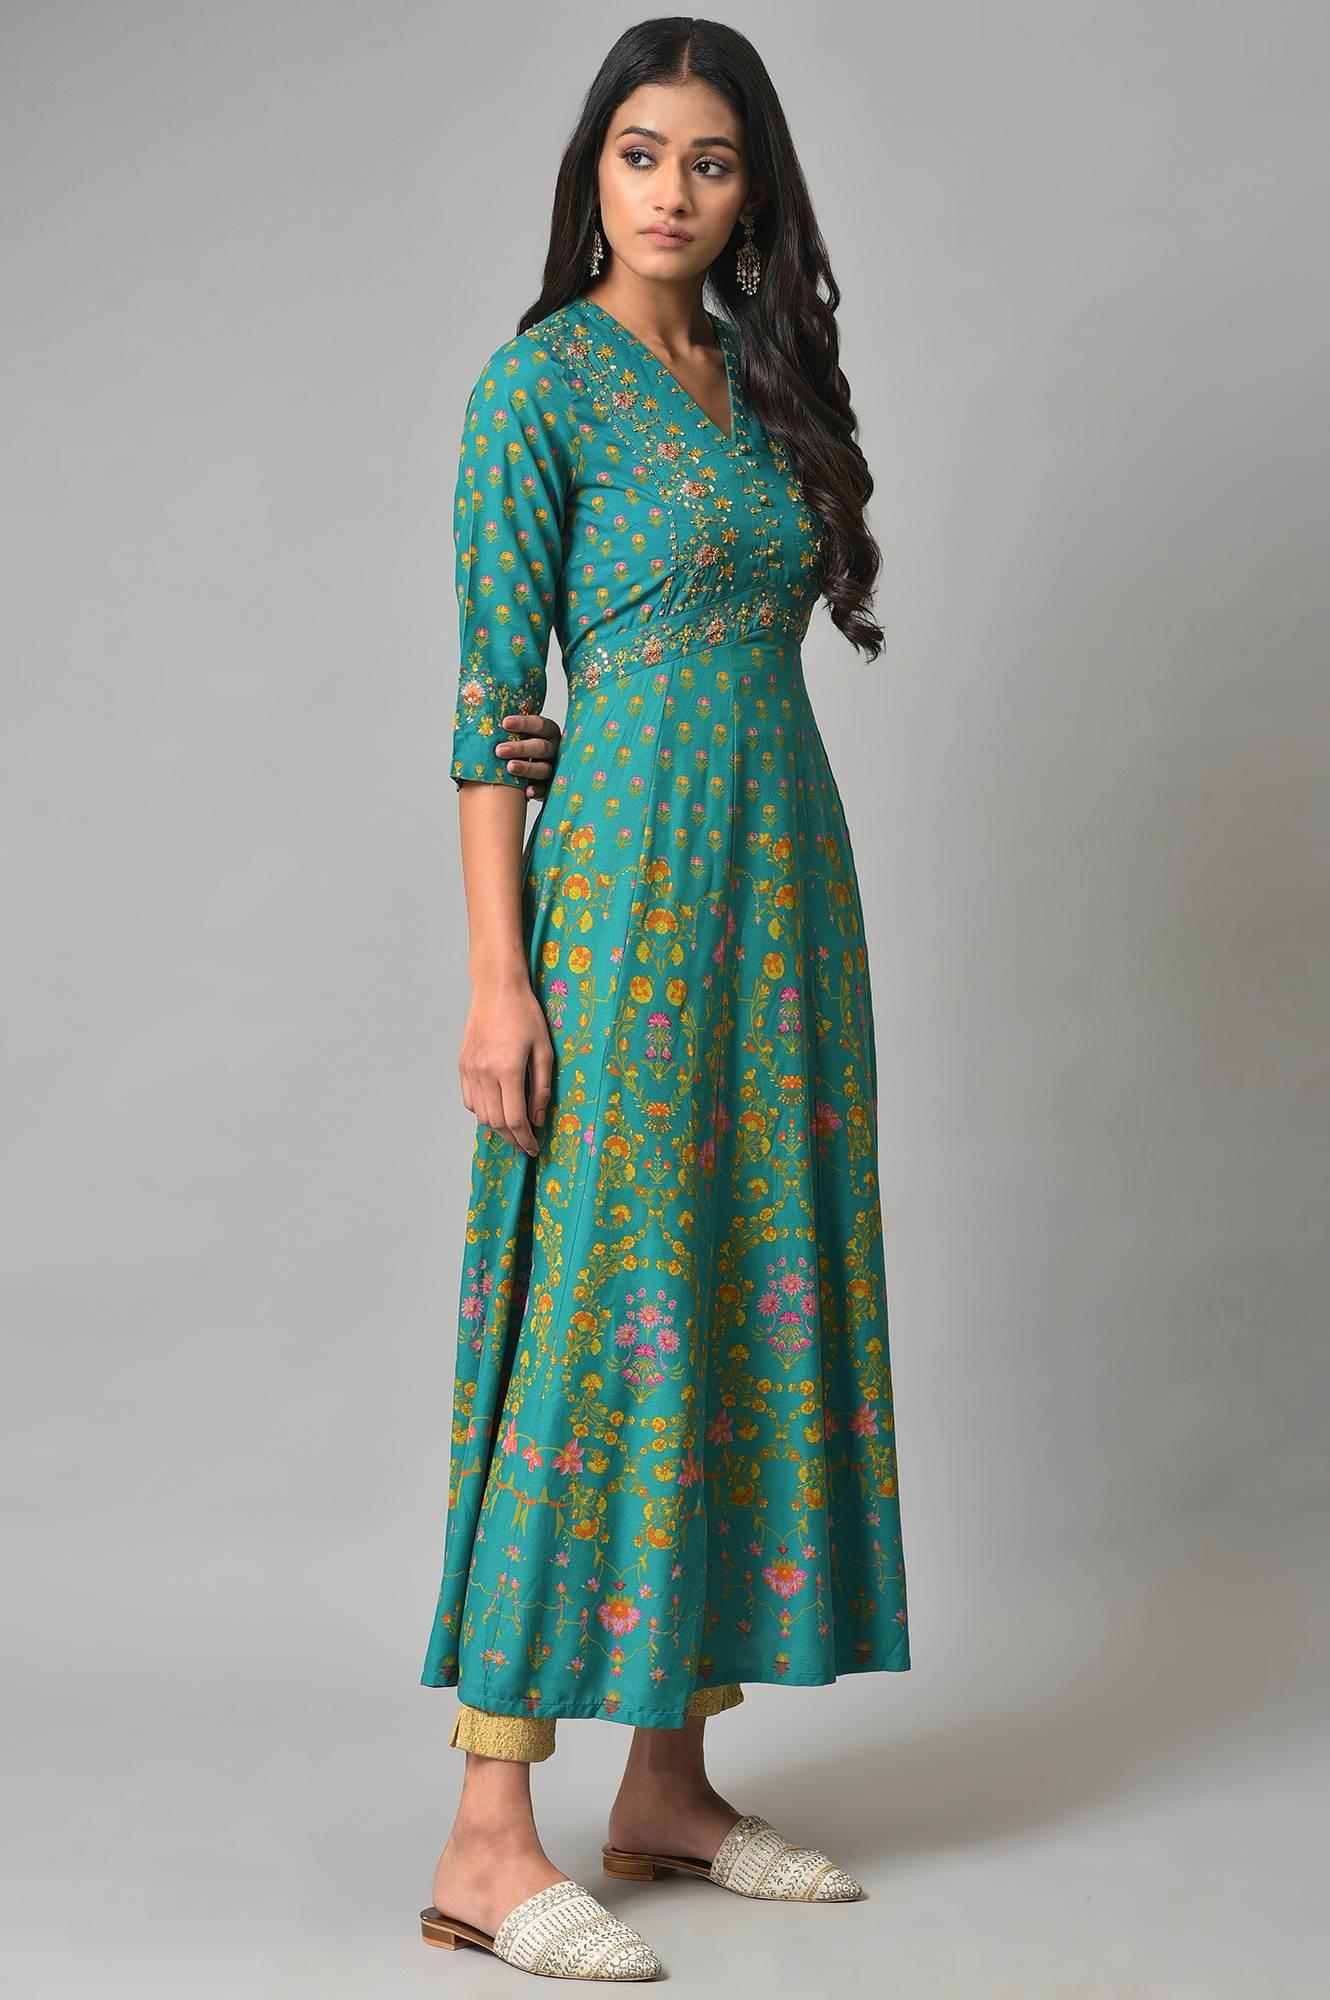 Dark Green Flared Dress With Floral Print And Sequins - wforwoman